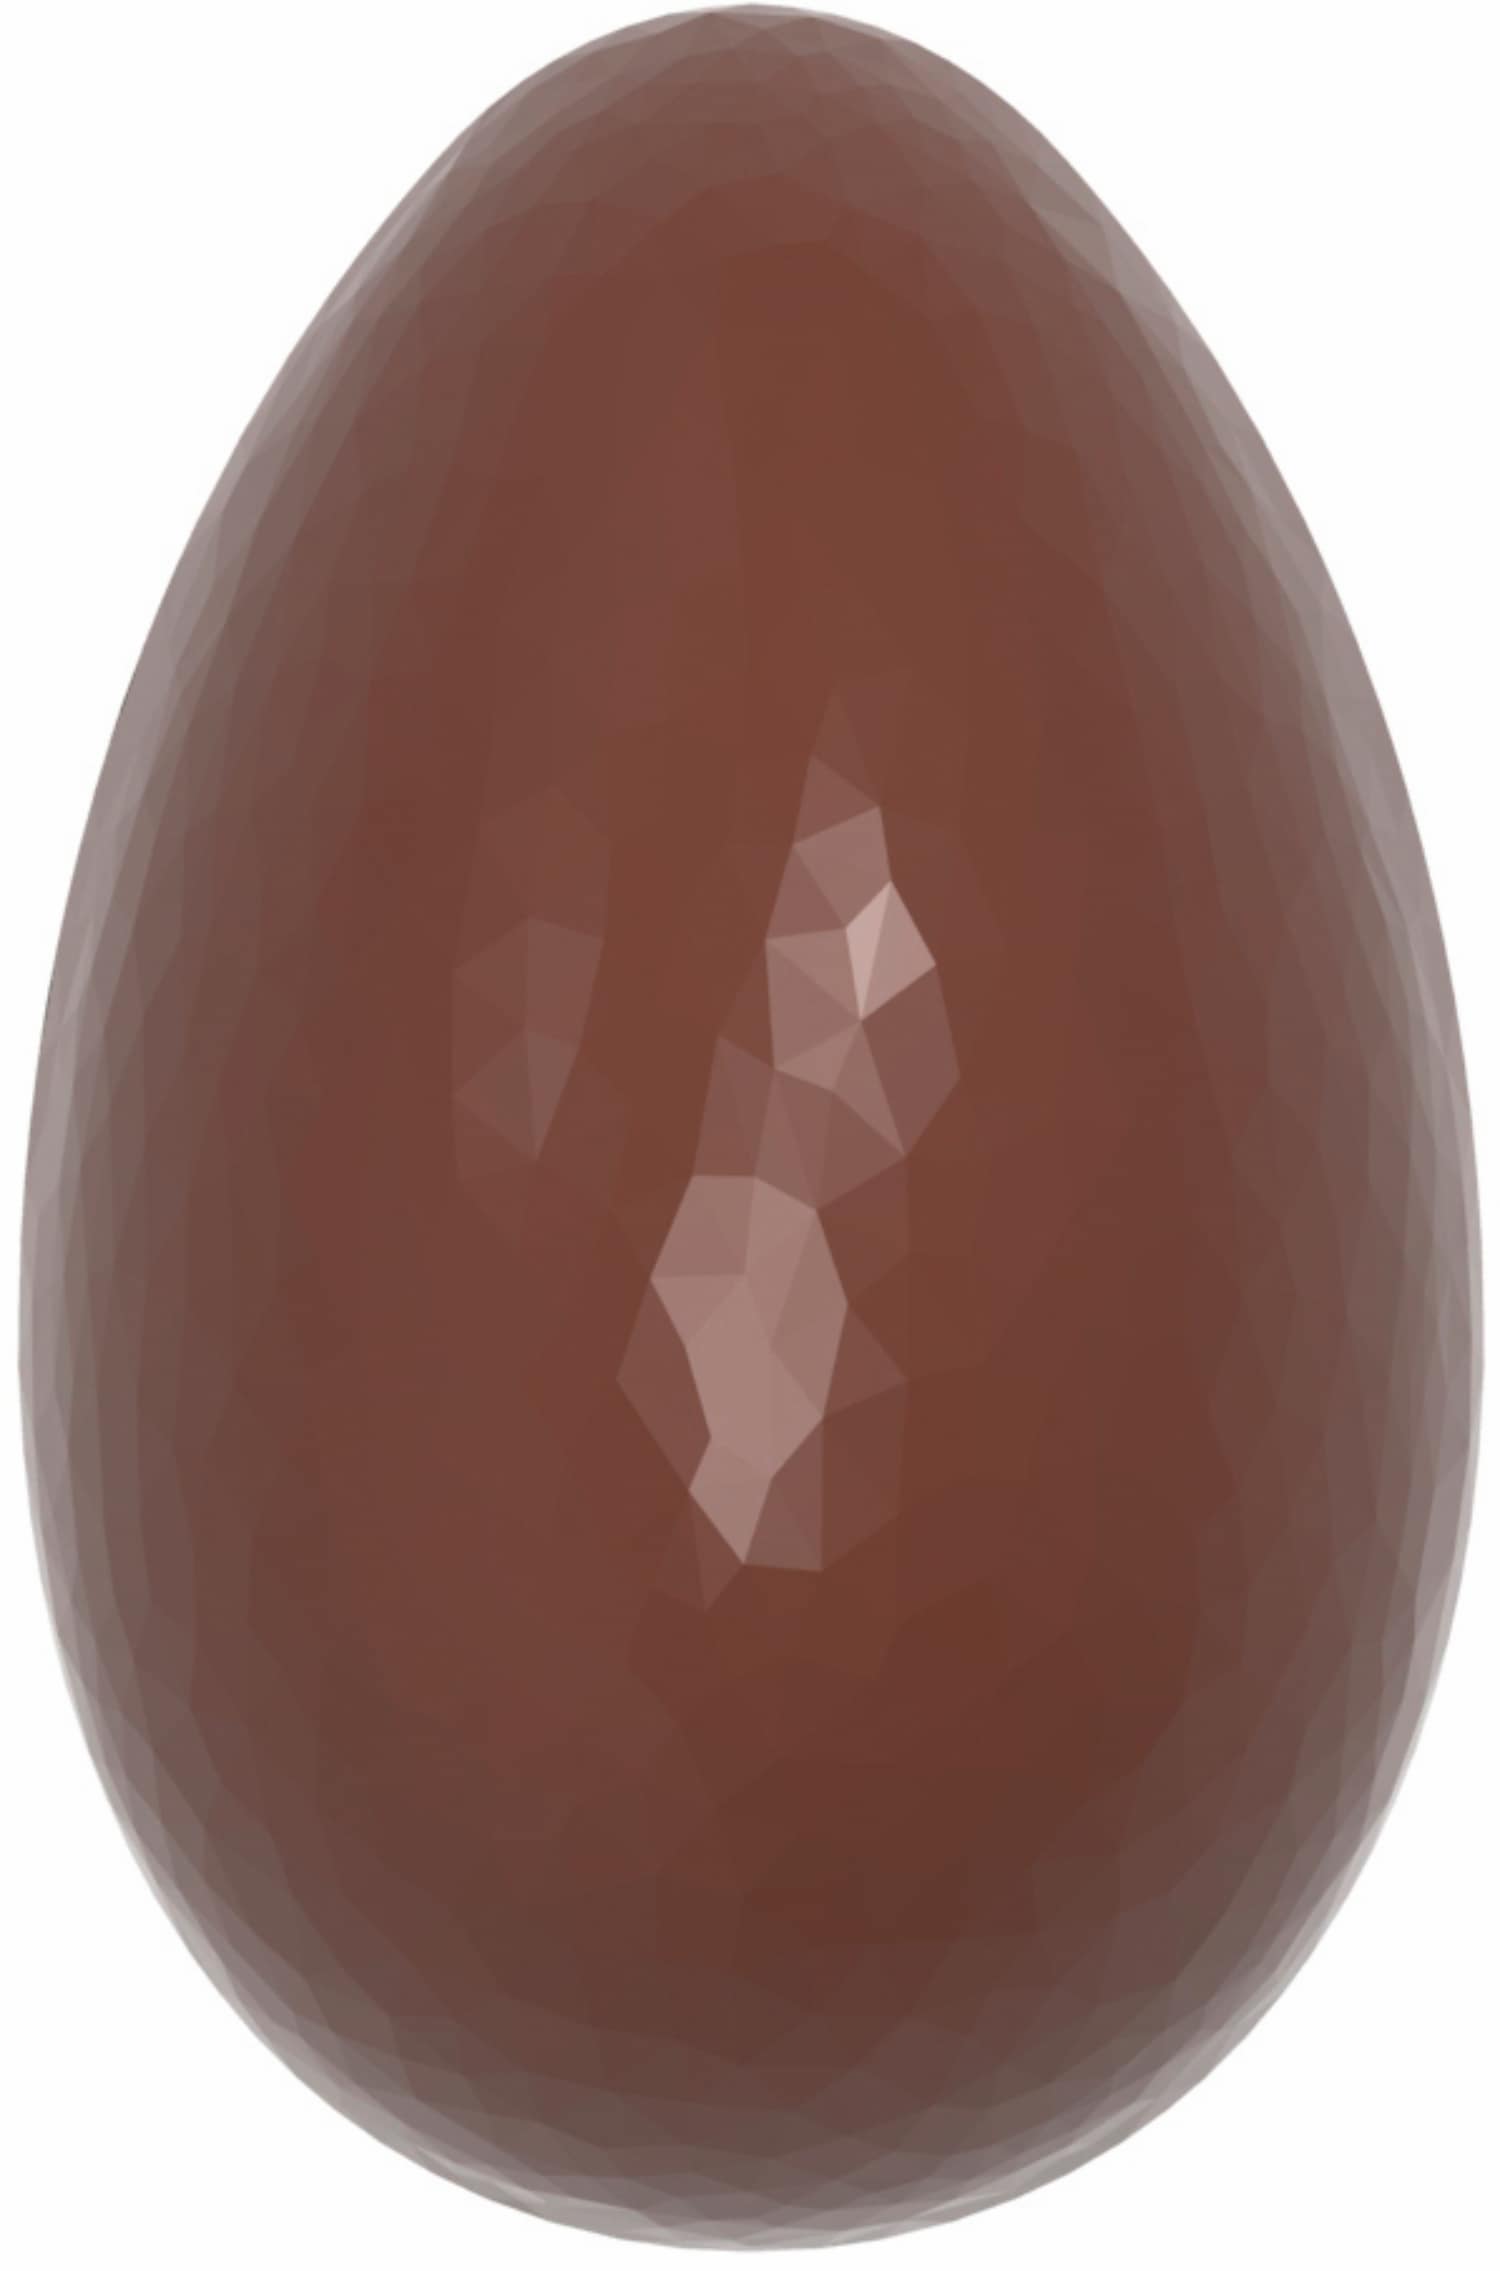 Chocolate mould "Easter egg" 421910